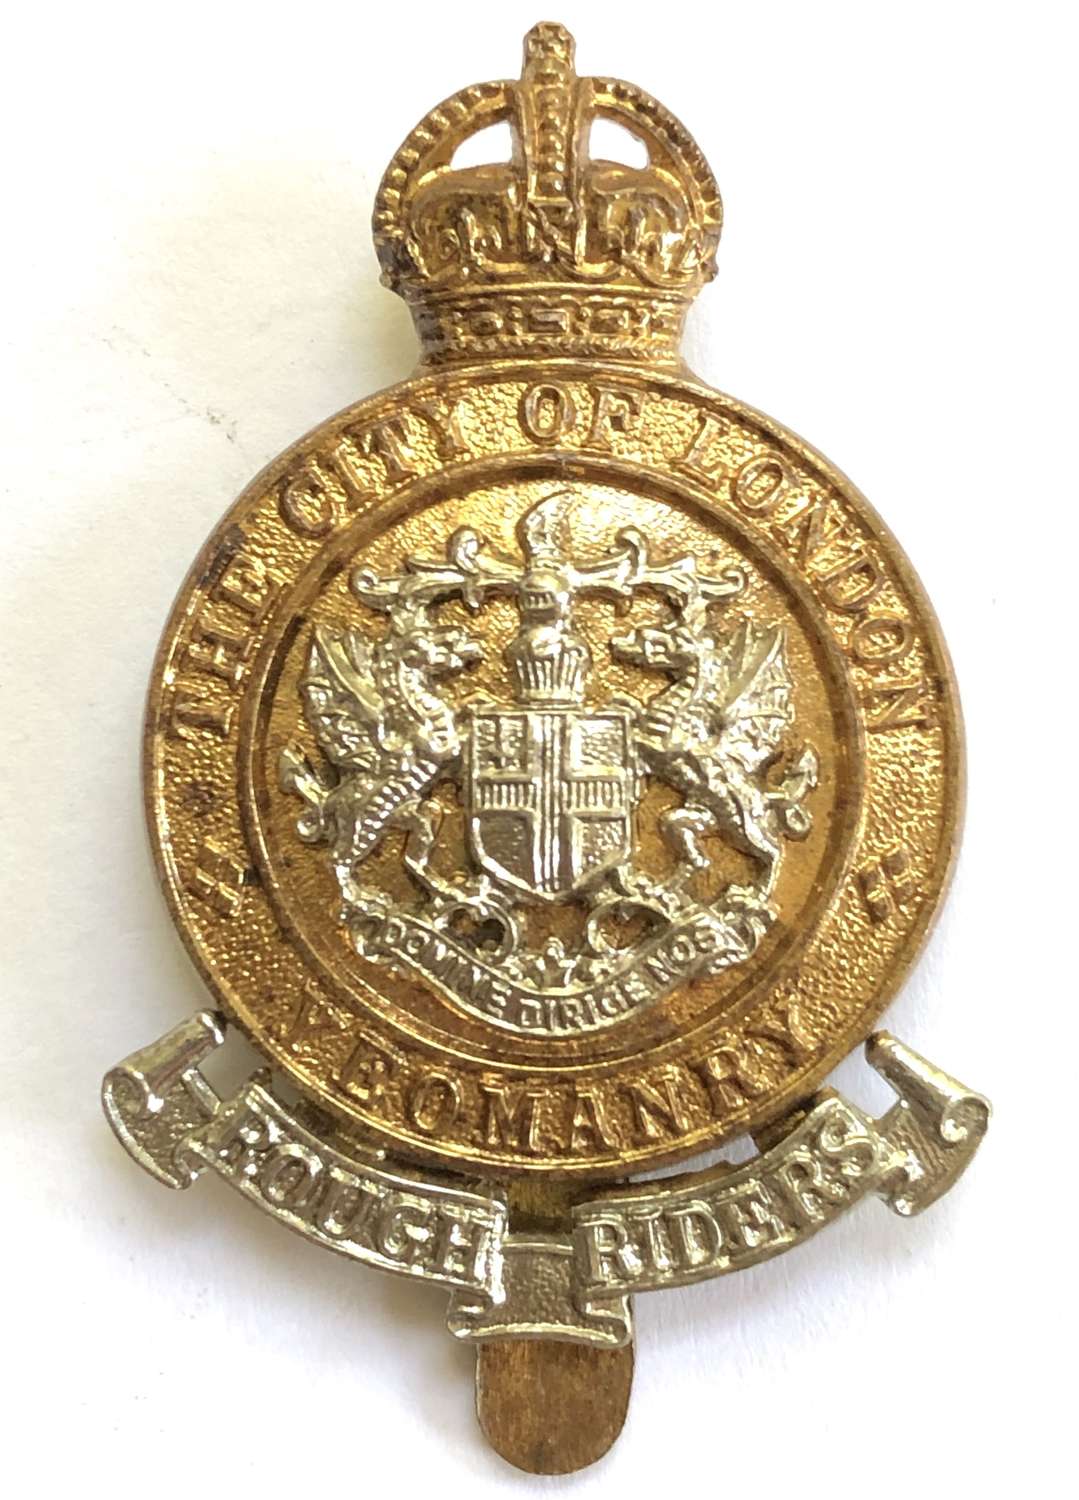 Rough Riders City of London Yeomanry OR’s cap badge by J.R. Gaunt